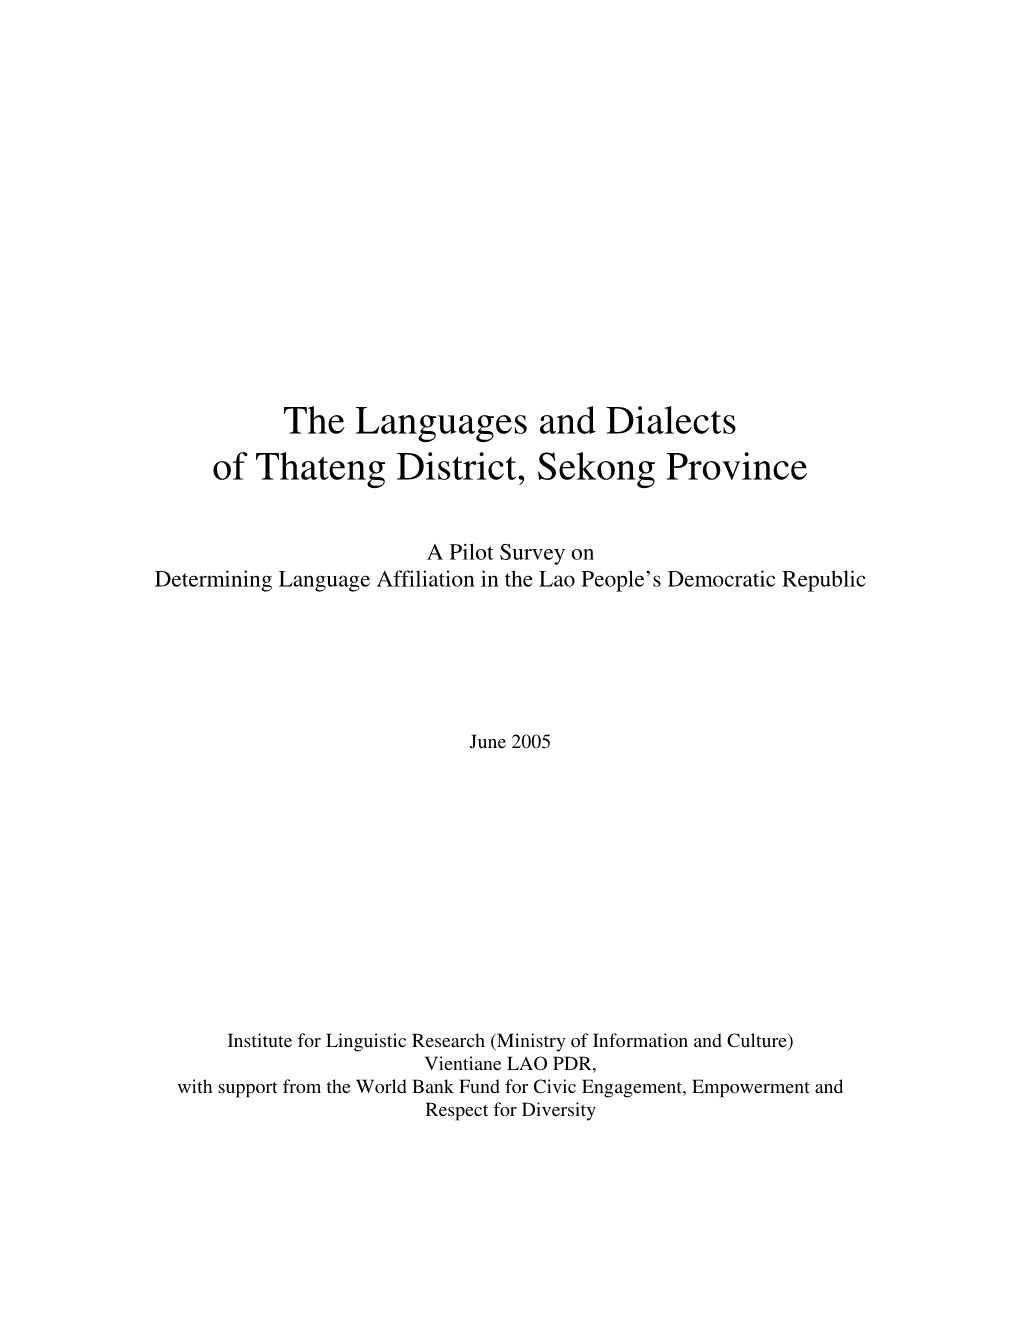 The Languages and Dialects of Thateng District, Sekong Province